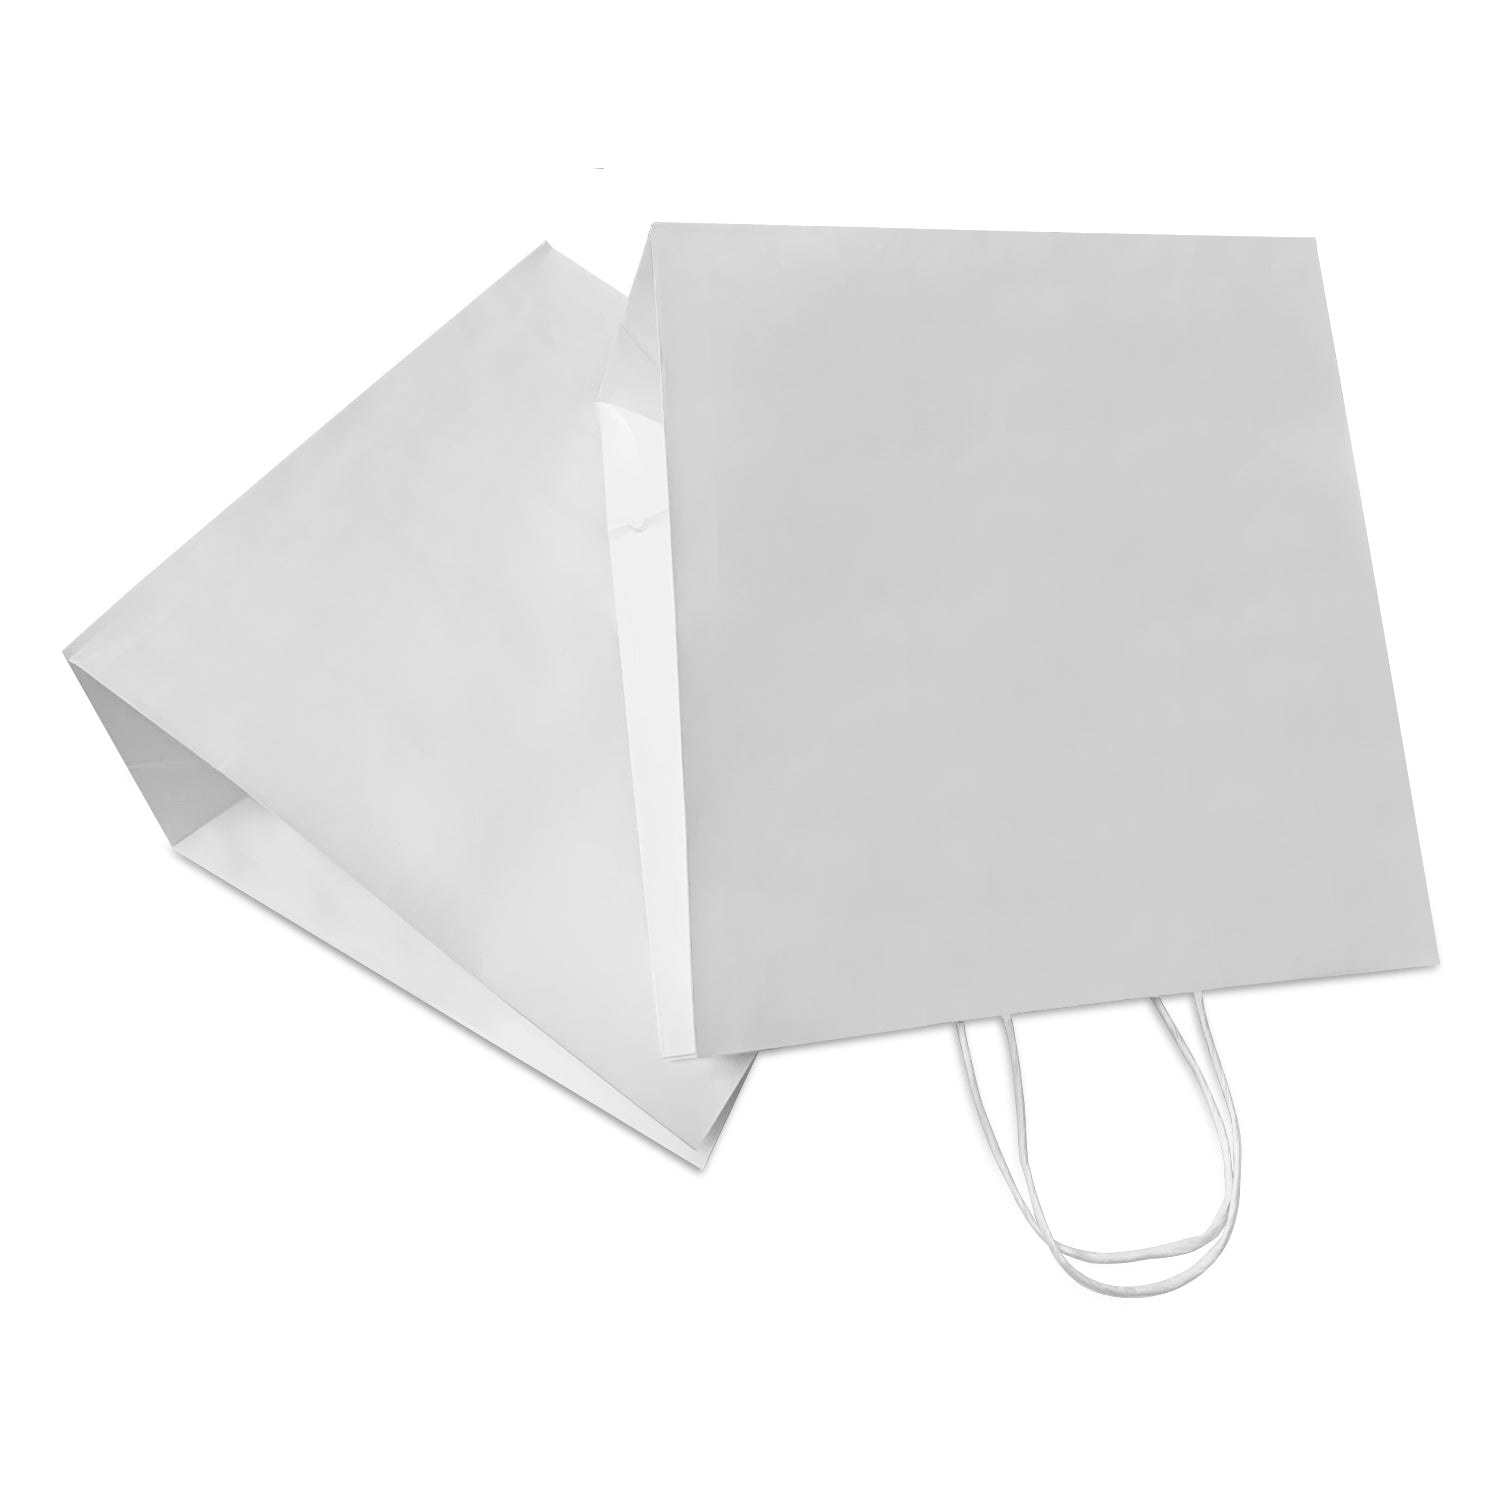 250 Pcs, Star, 13x7x13 inches, White Kraft Paper Bags, with Twisted Handle